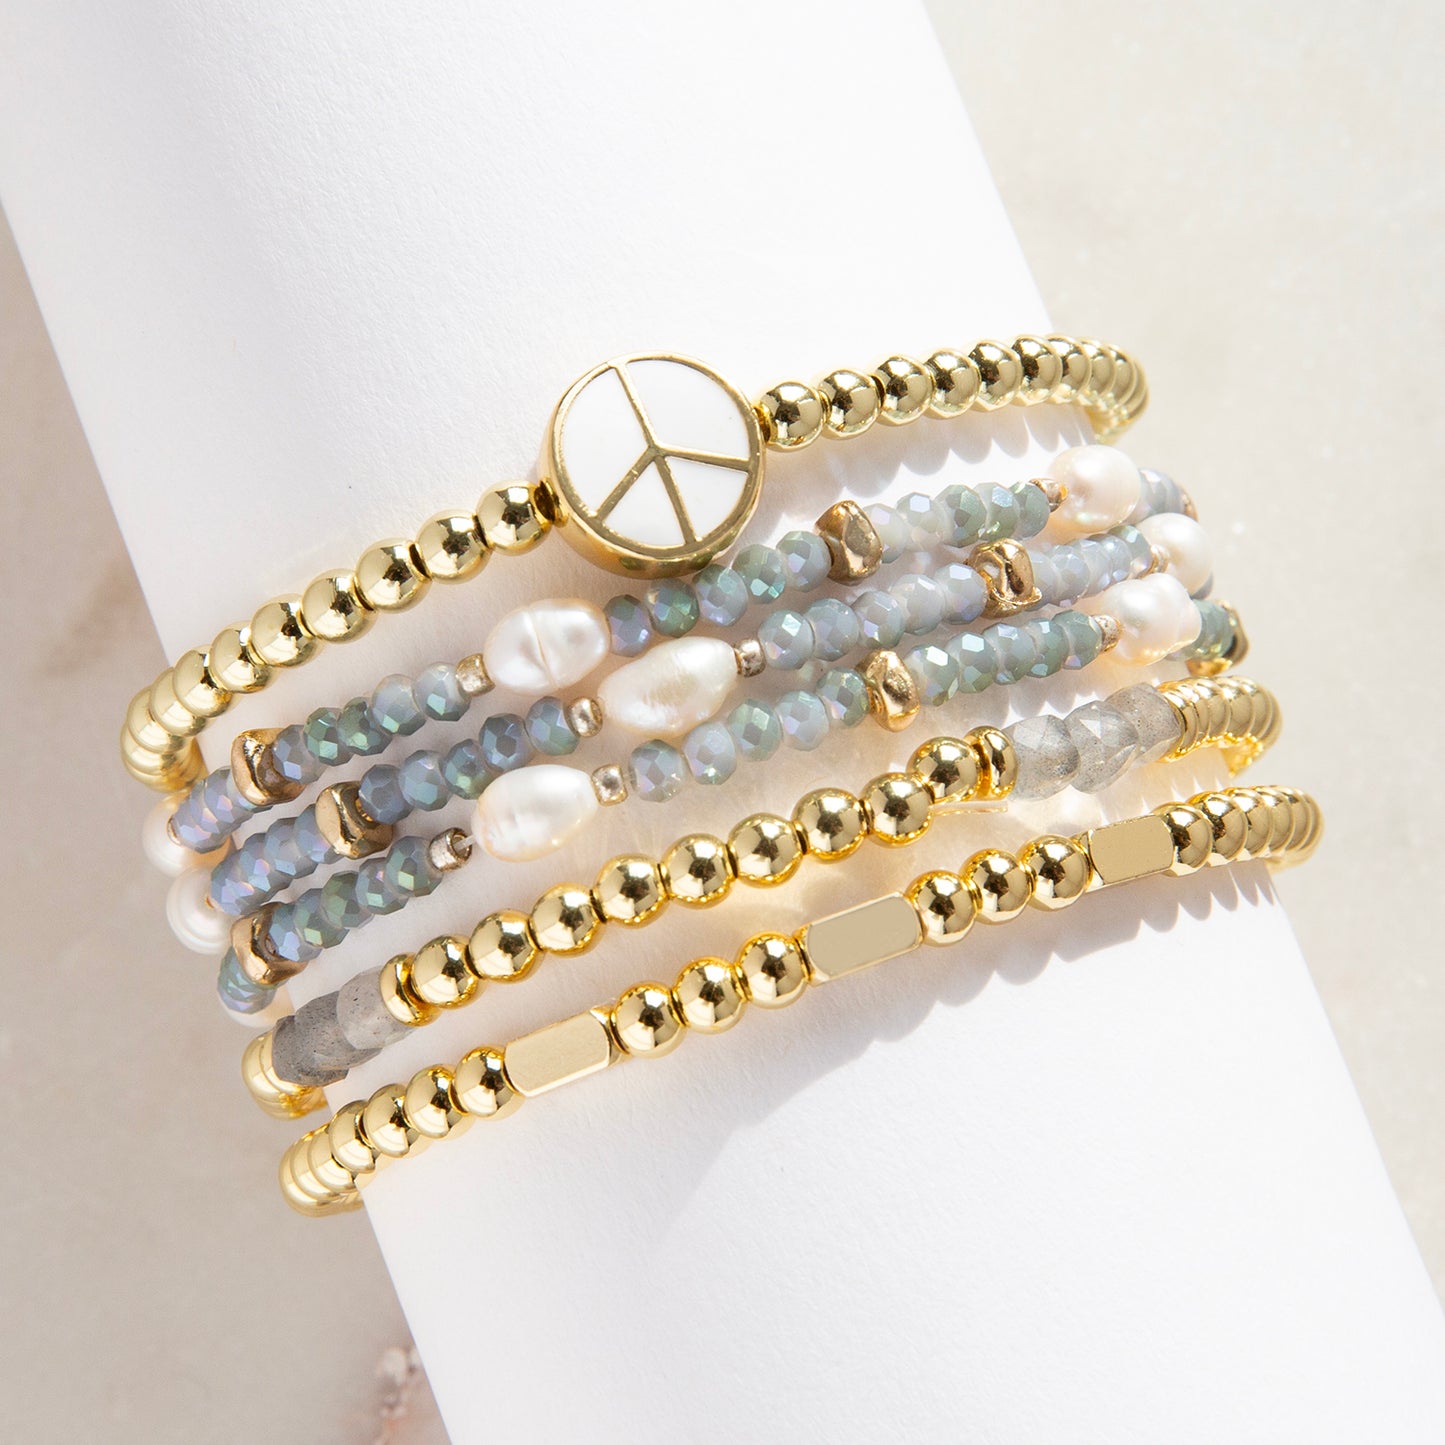 SS24 Collection Bracelet Stack - The Lannie